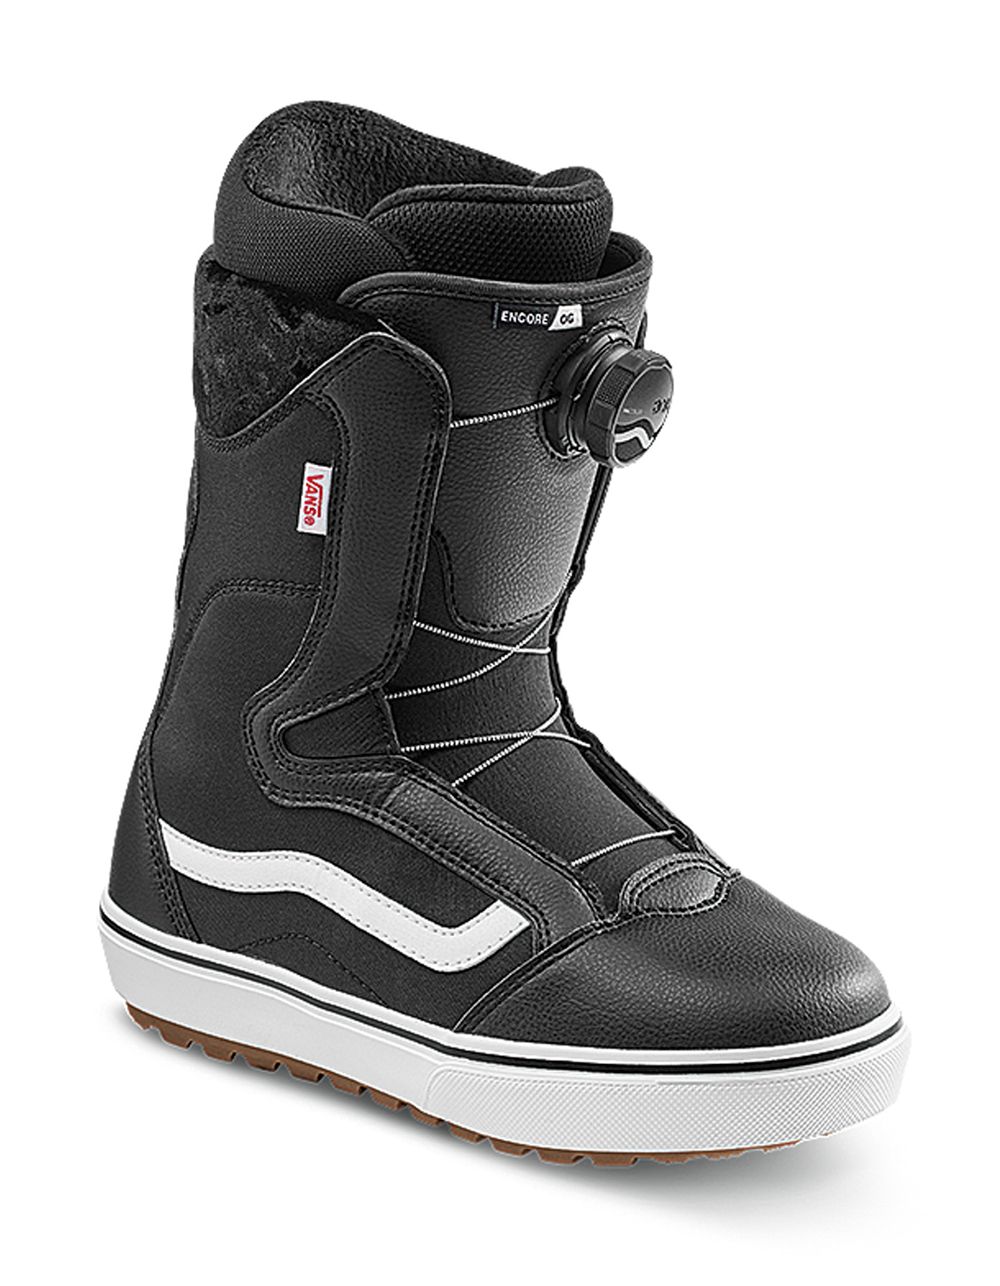 Vans snowboard boots- surfing time